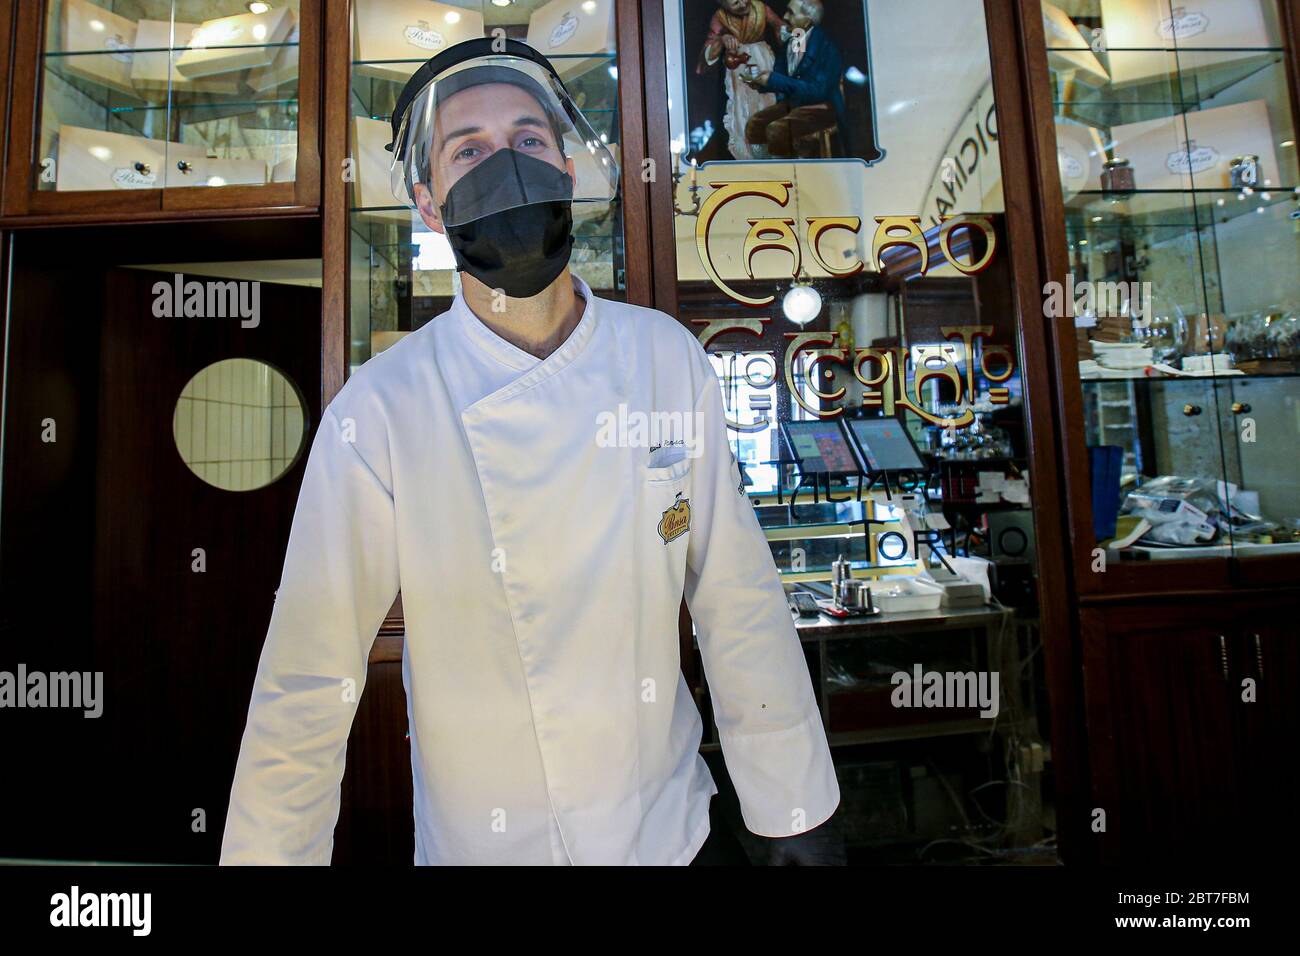 Andrea Pansa, owner of Pansa Cafè is at work wearing protective mask and visor. Italy begins a staged end to a nationwide lockdown due to the spread of the coronavirus disease, allowing the re-opening of all activities except schools and the mobility of citizens. Stock Photo